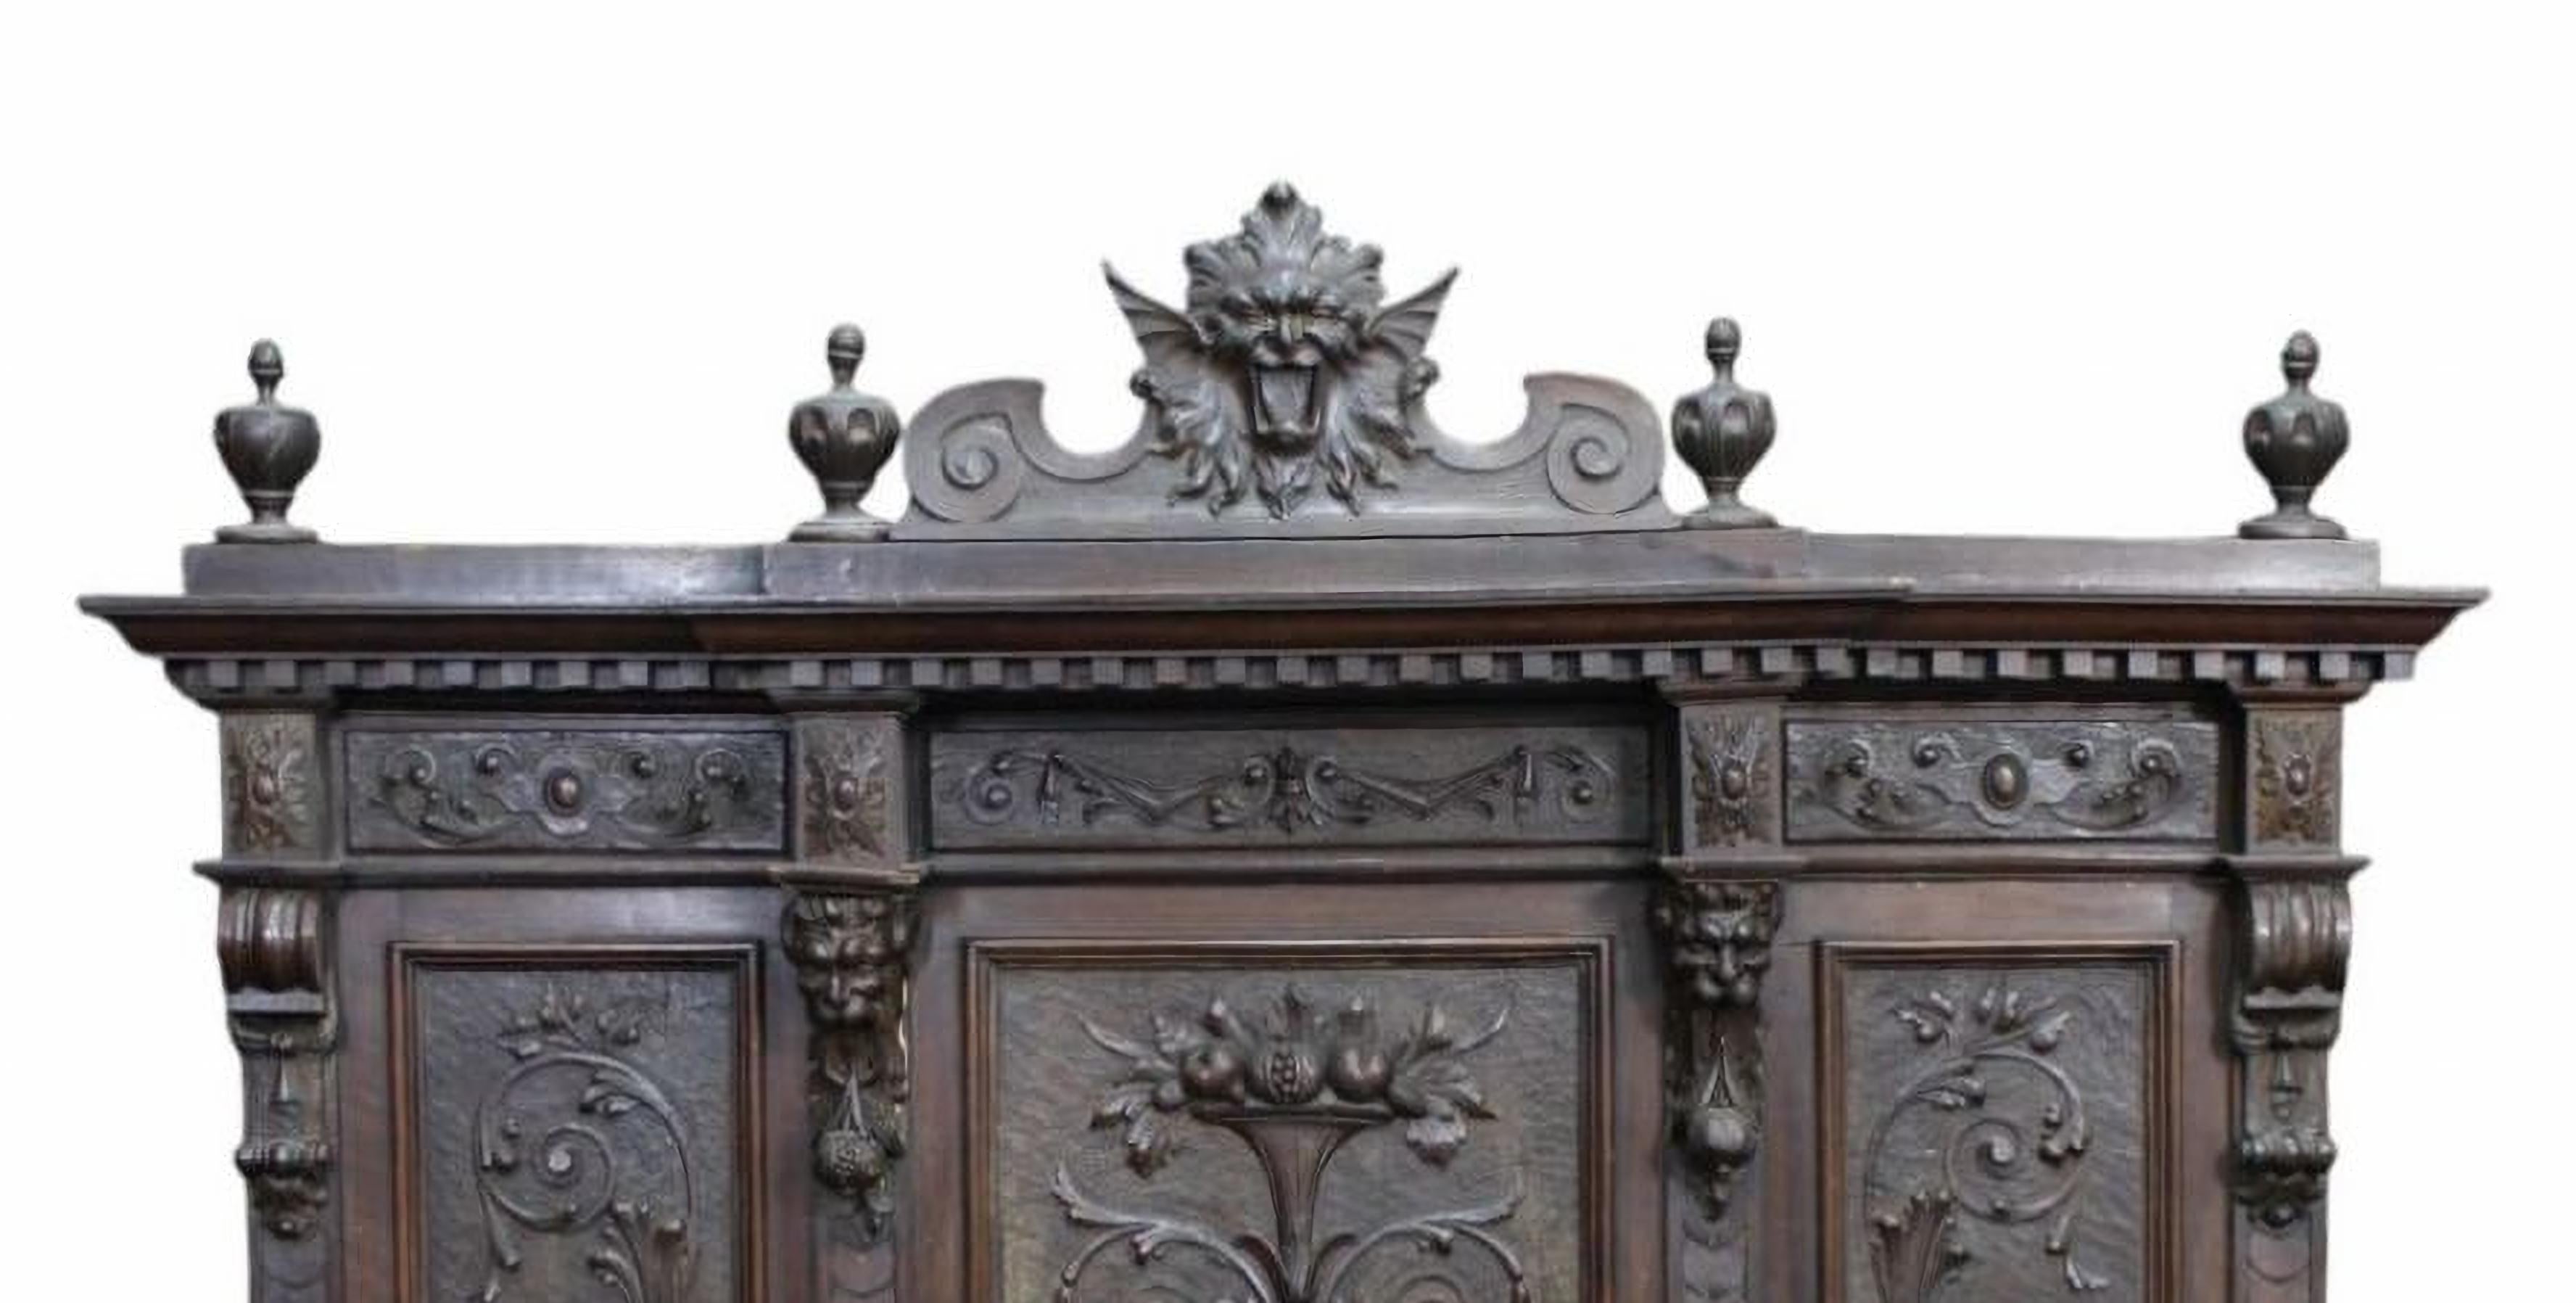 19th Century Italian CHEST WITH STAND
in richly carved wood in Renaissance style
h 186 x 155 x 47 cm
good condition for the age